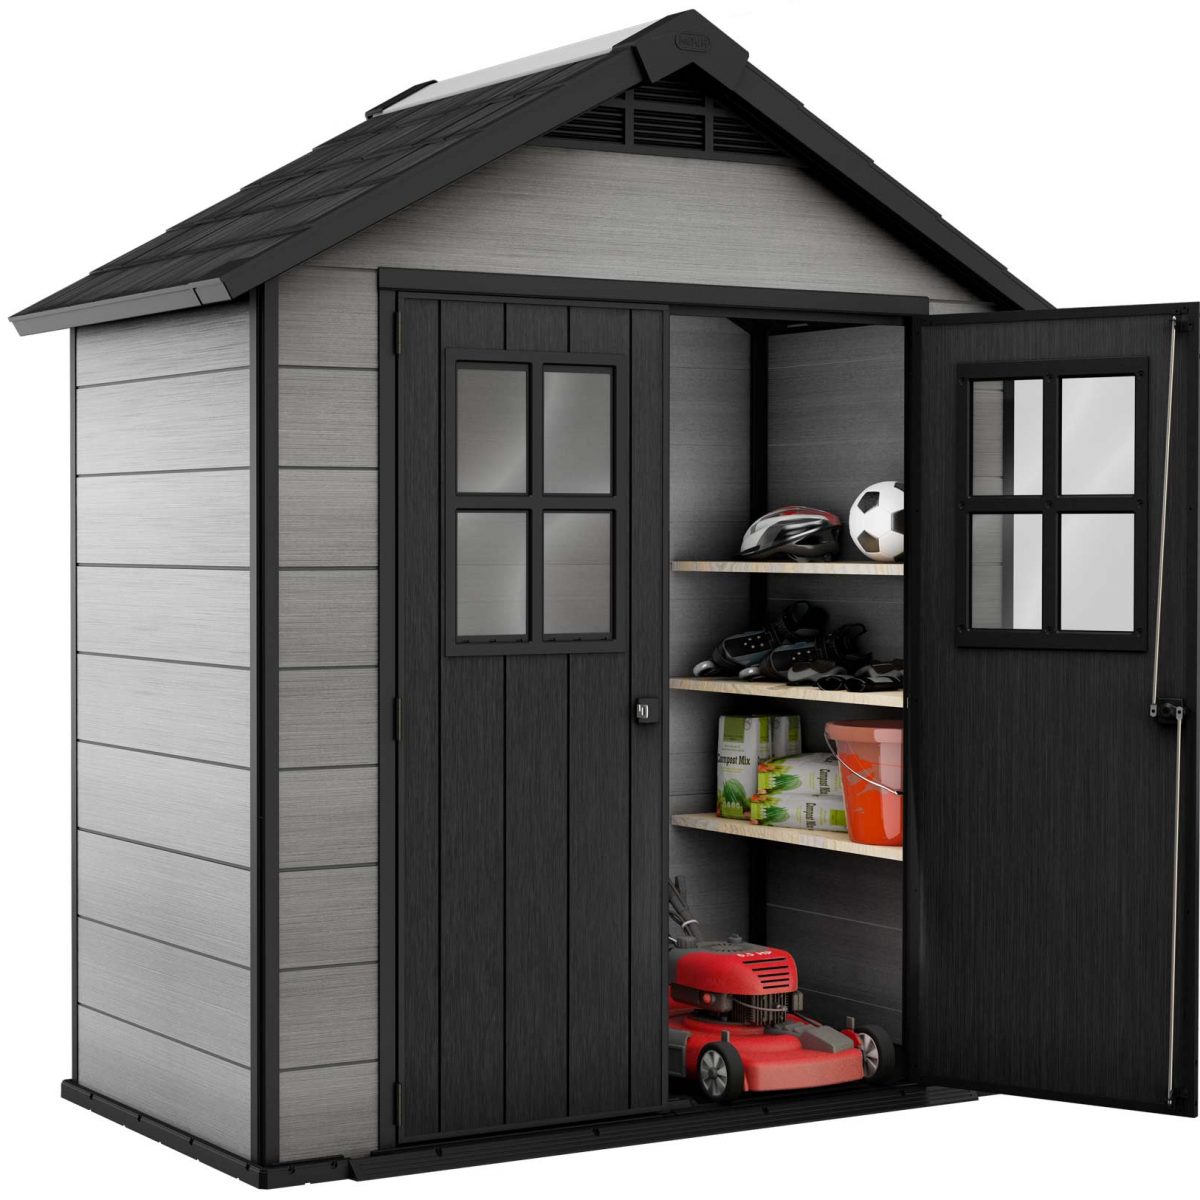 Keter Oakland 754 Shed12 1200x1200 